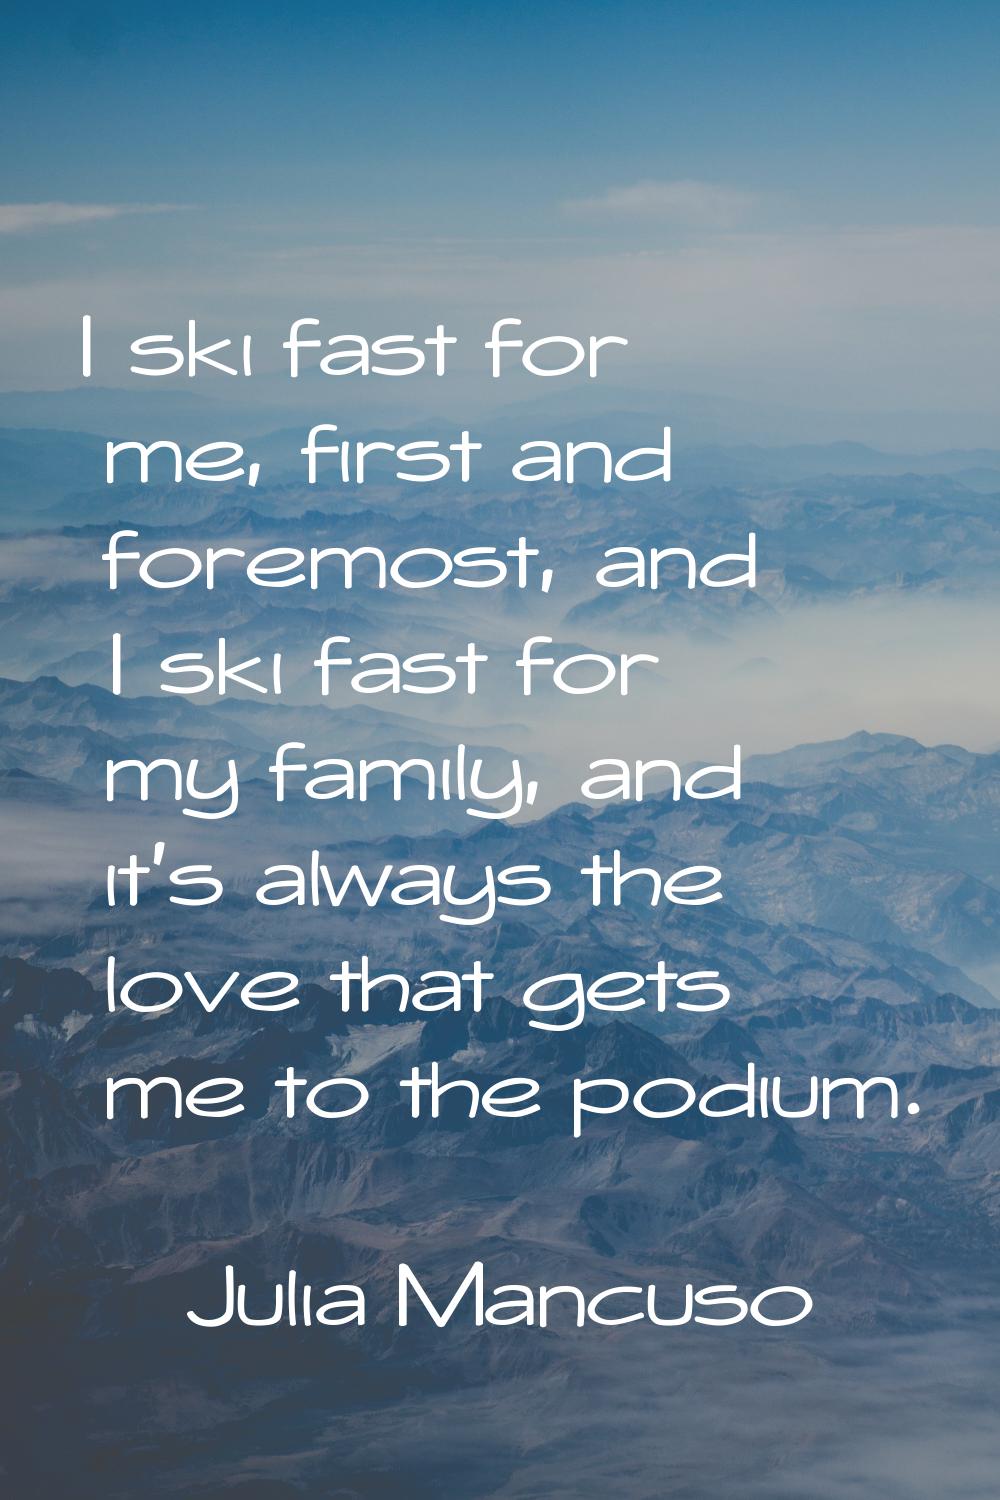 I ski fast for me, first and foremost, and I ski fast for my family, and it's always the love that 